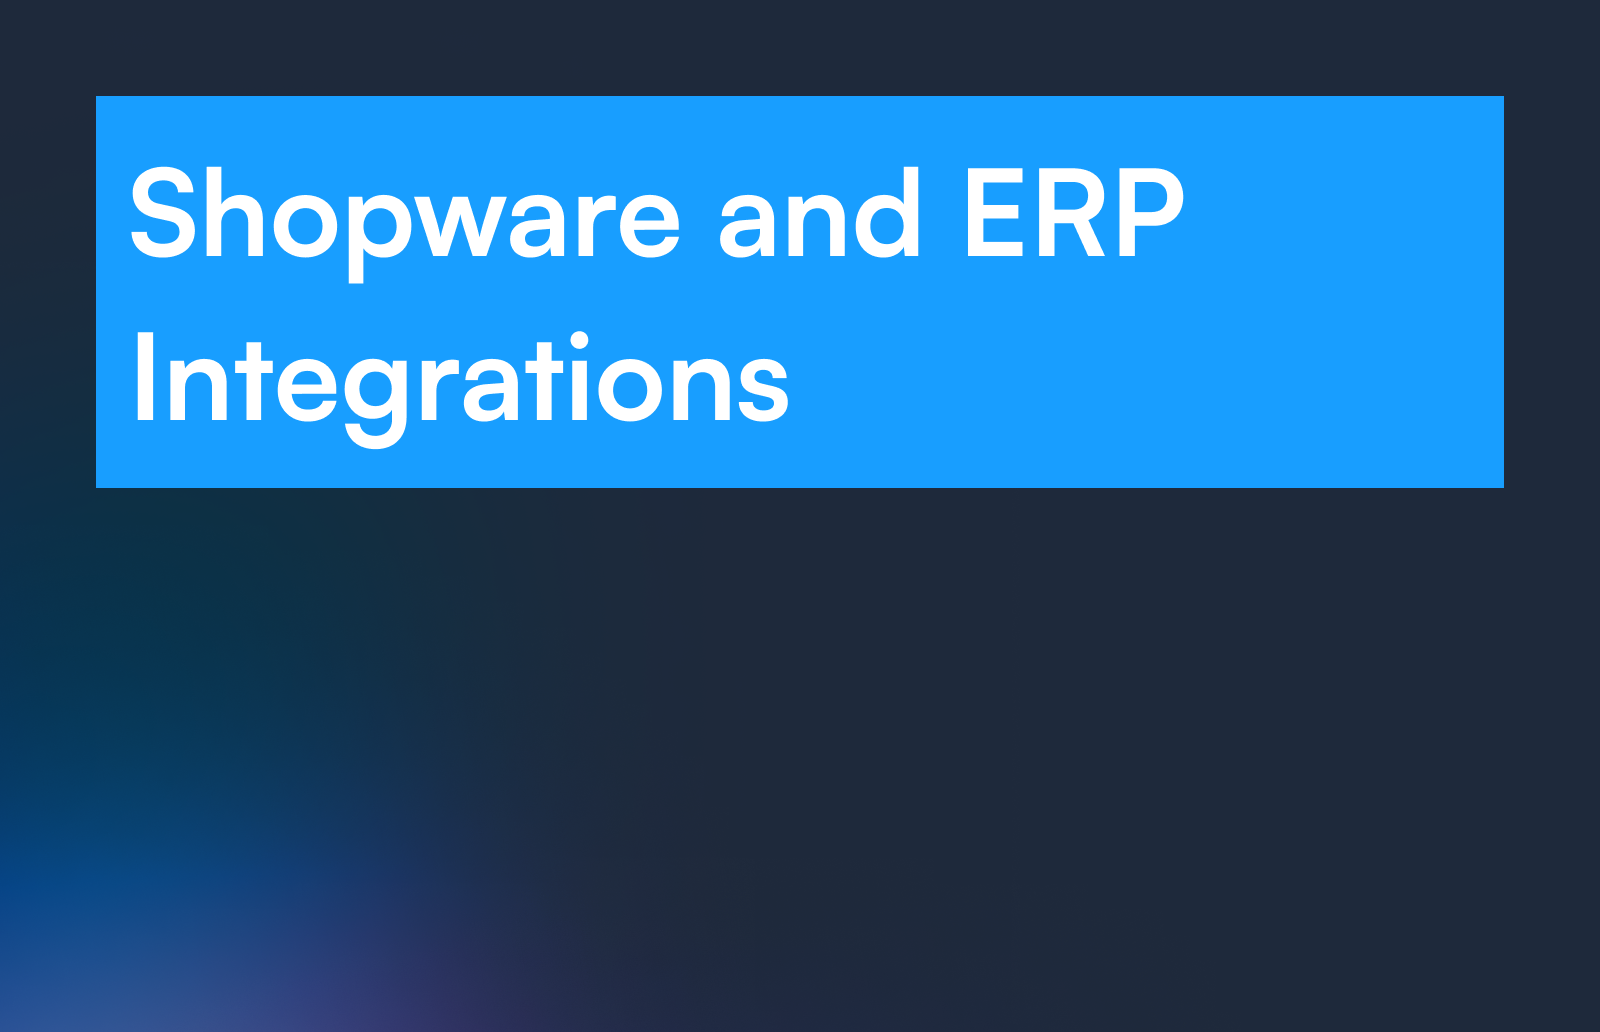 Shopware and ERP Integrations